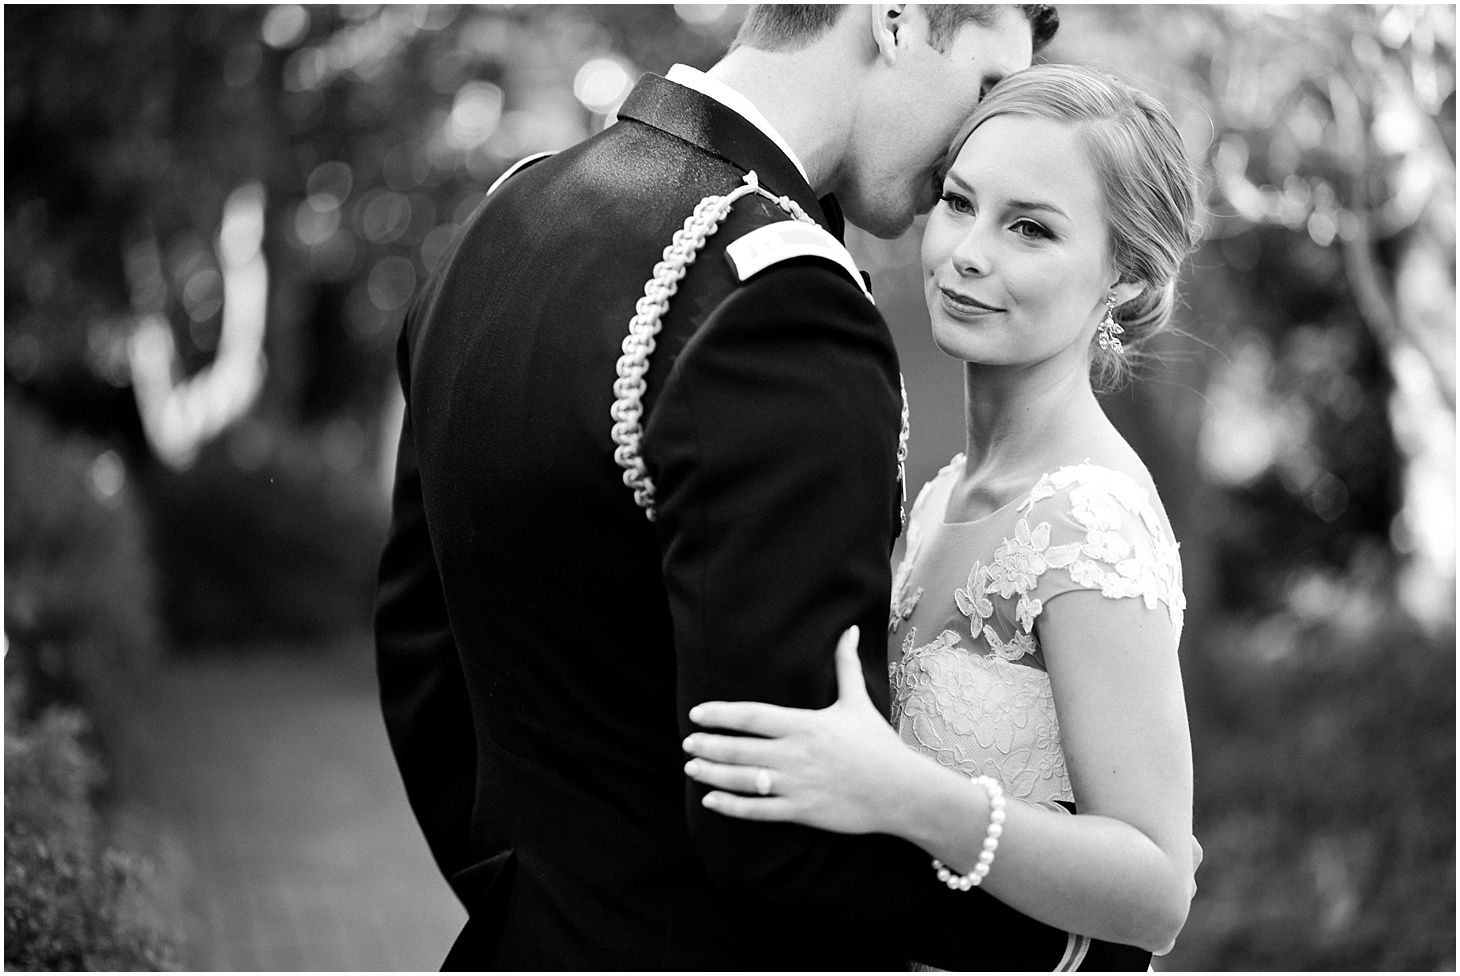 Wedding Portraits at Old Presbyterian Meeting House | Southern Black Tie wedding at St. Regis DC in Dusty Blue and Ivory | Sarah Bradshaw Photography